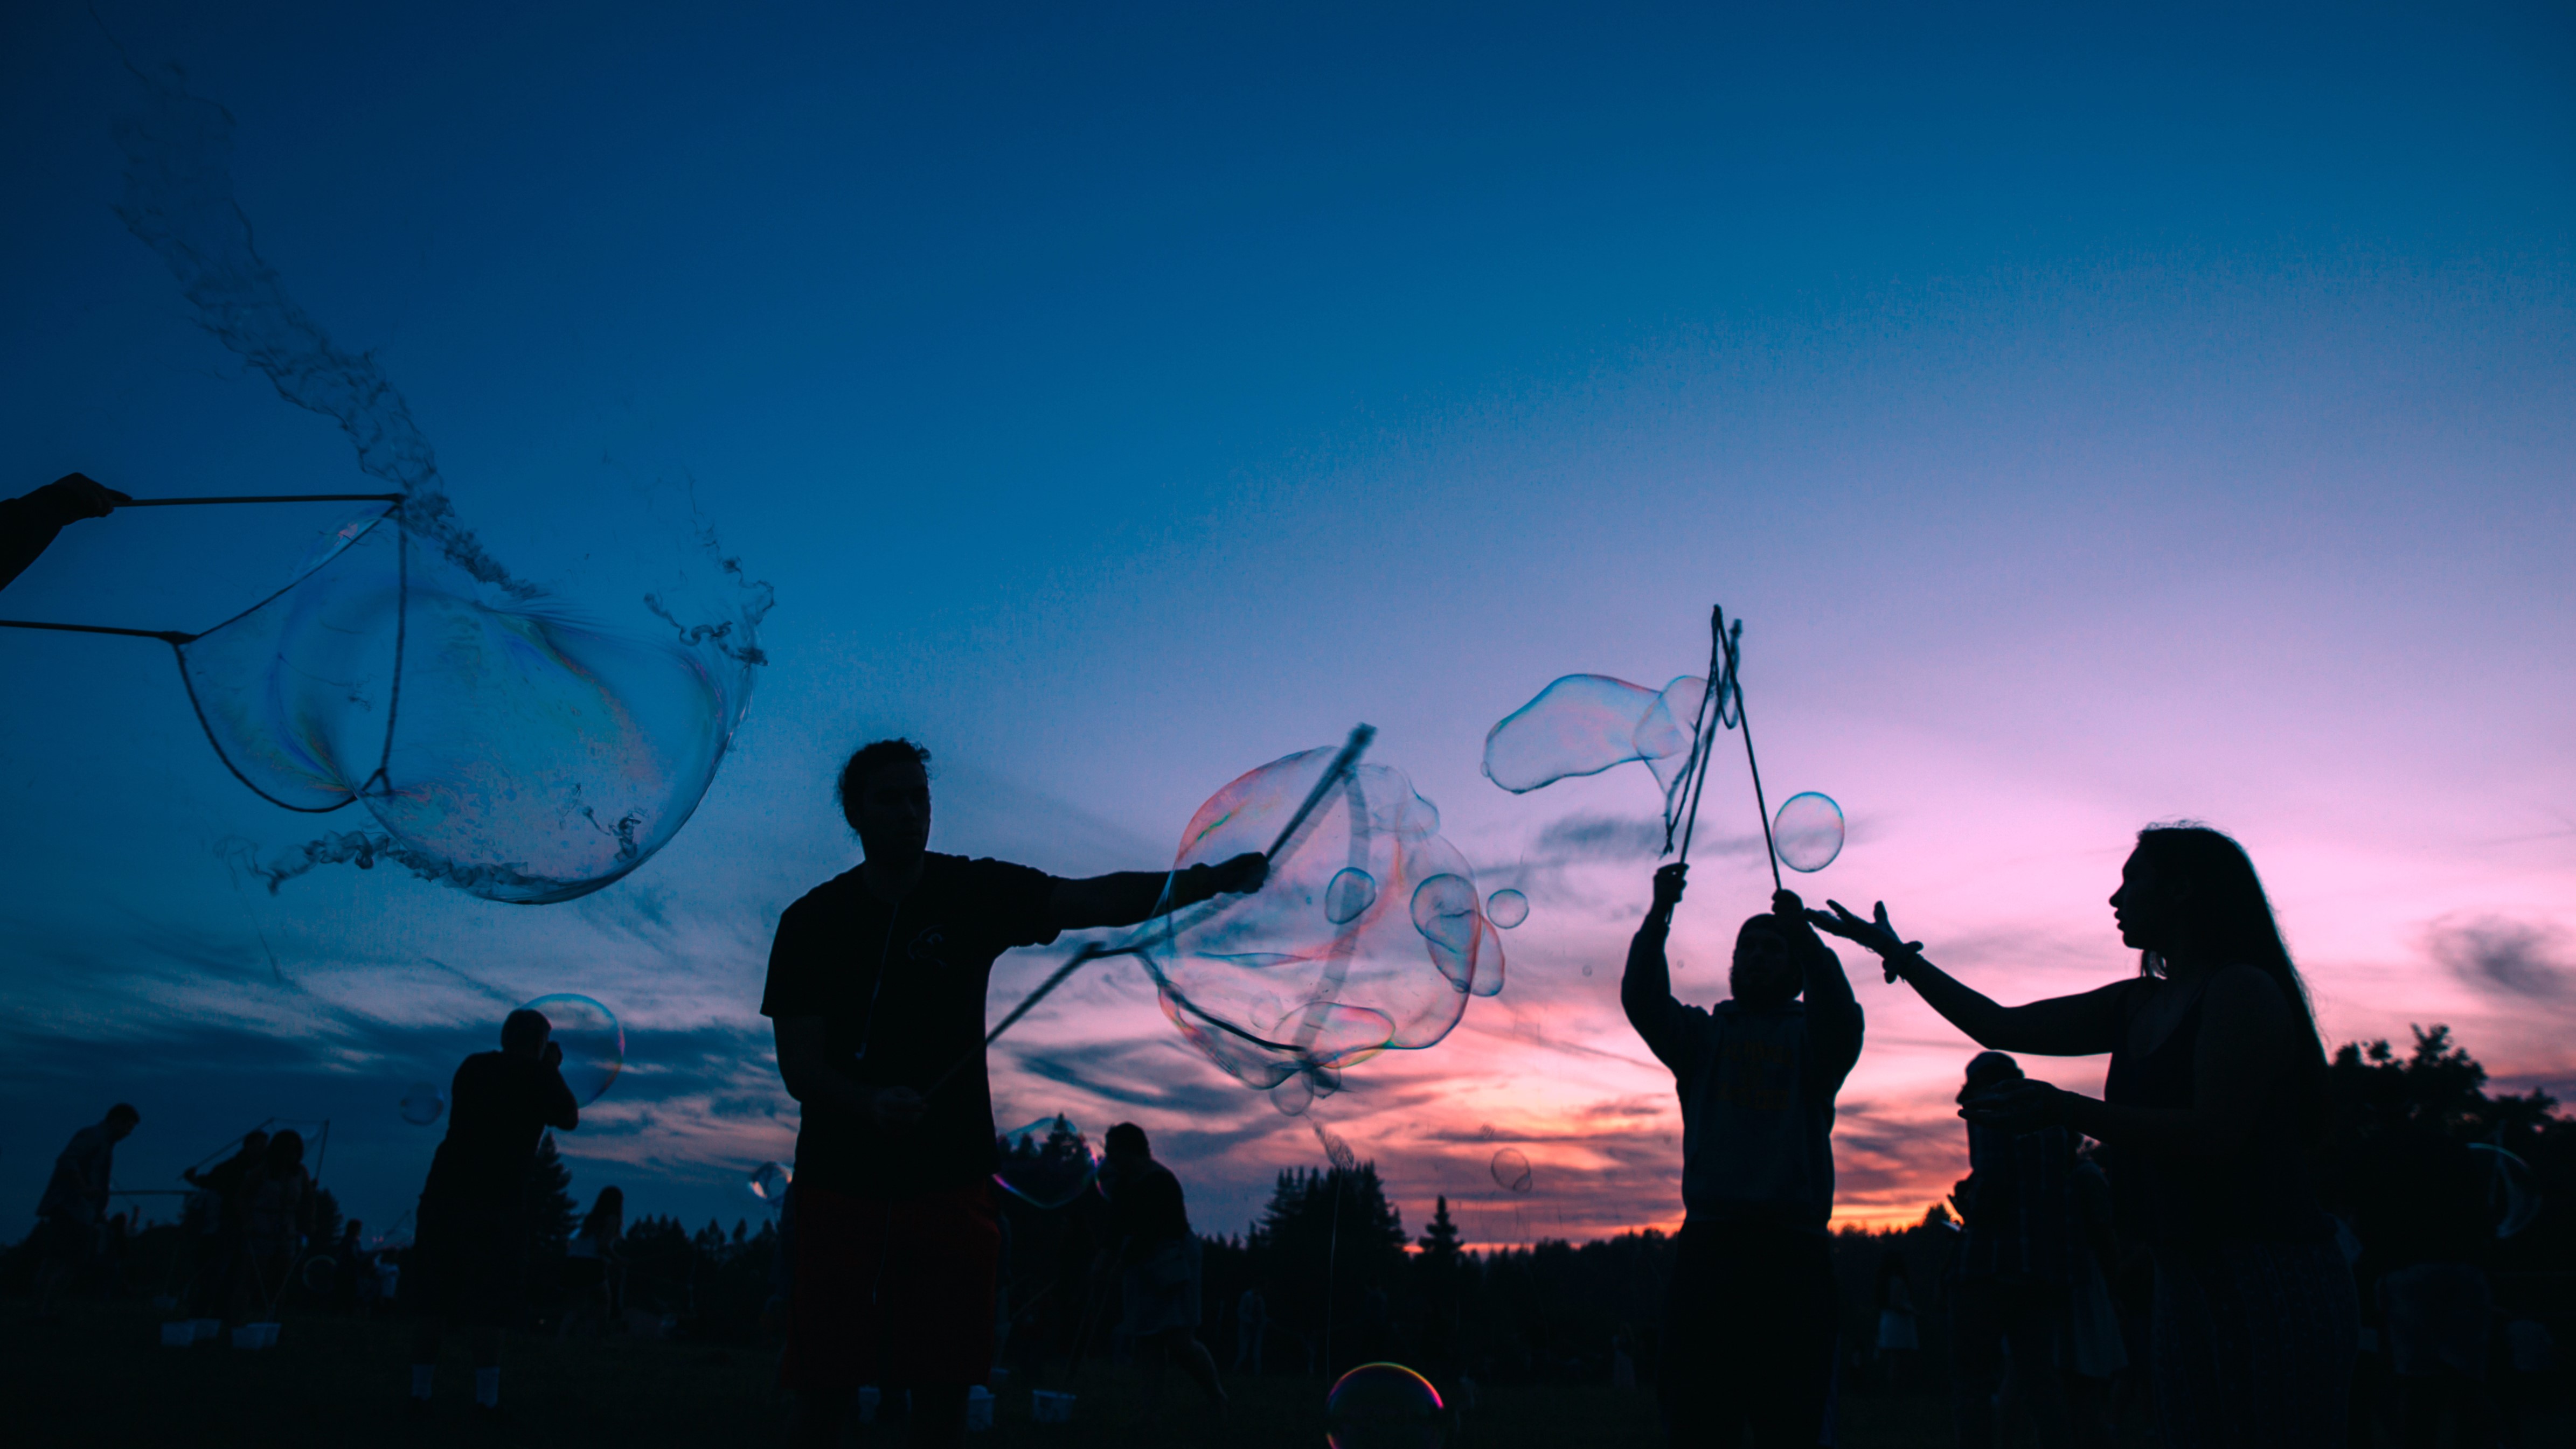 Sunset photo of silhouettes of students blowing large bubbles 